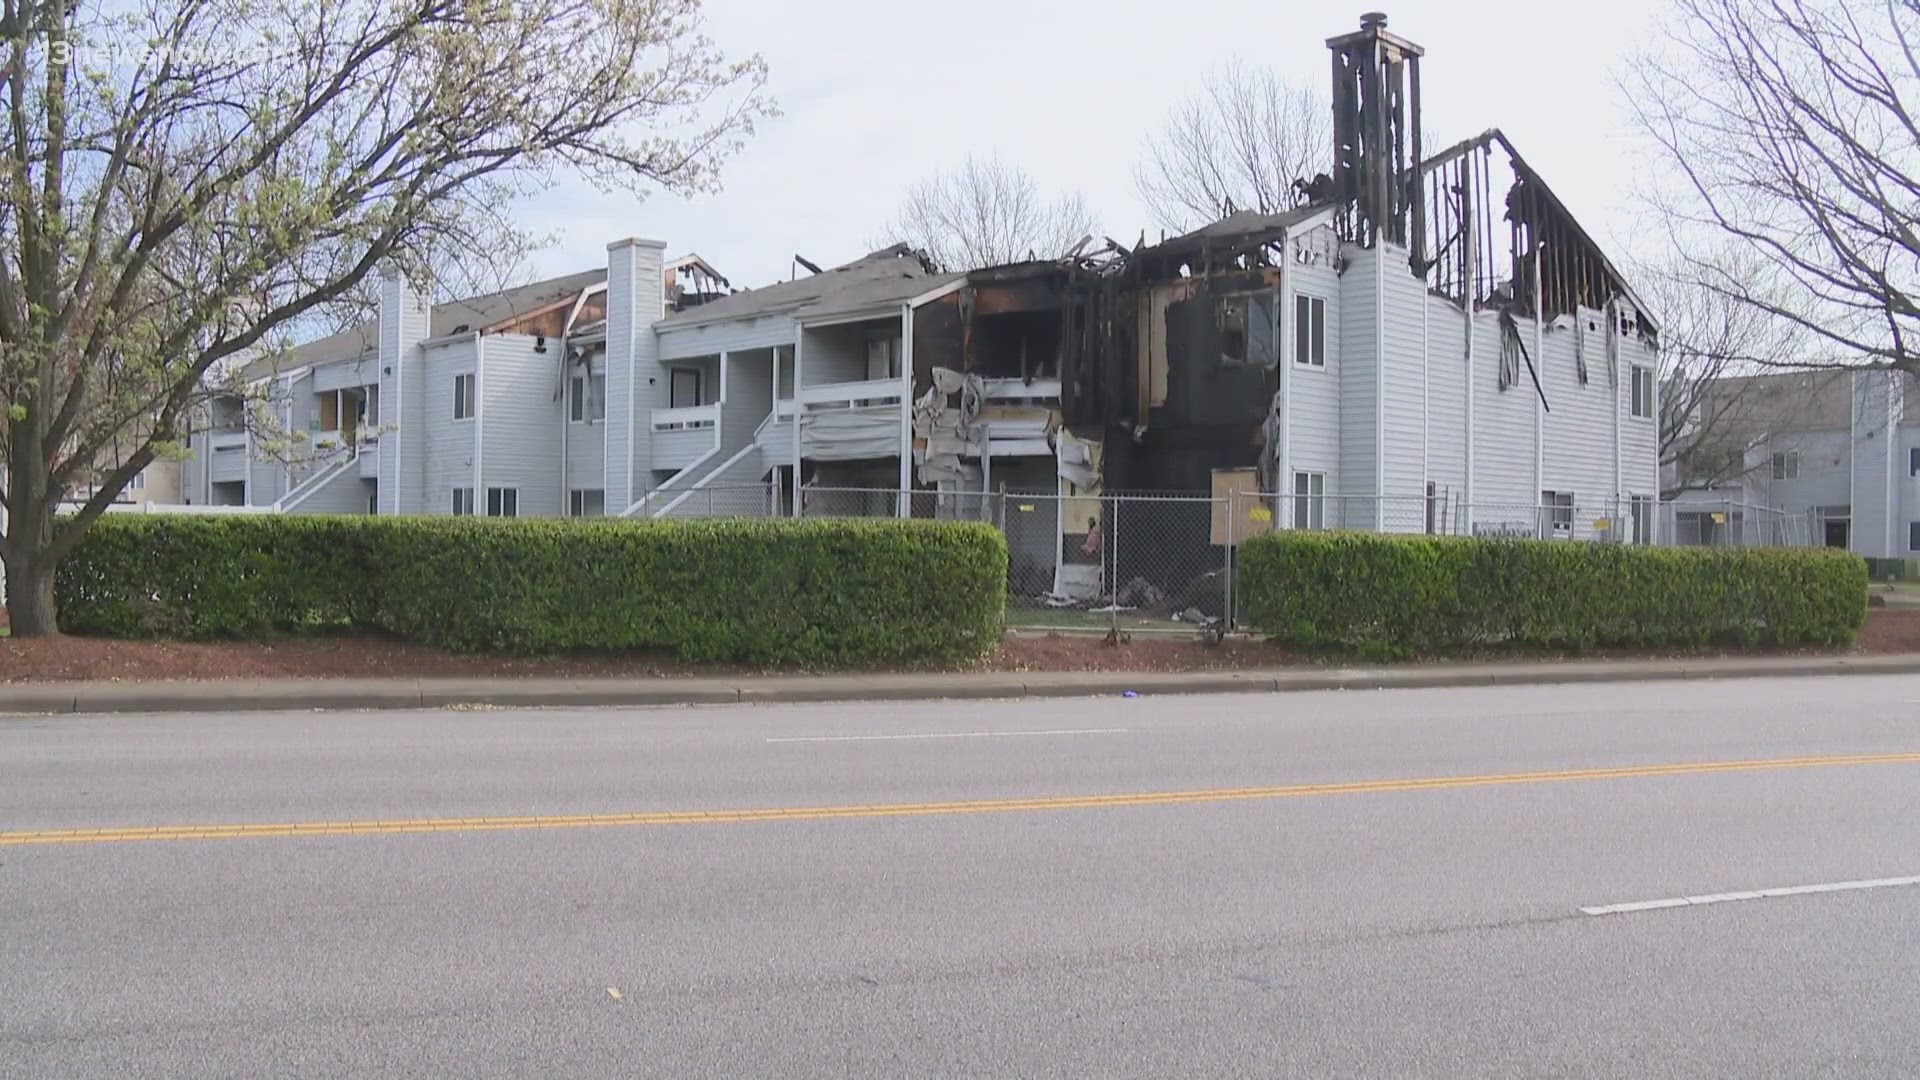 Indan 16 Yarsxxx - 16 units affected in Indian Lakes Apartments fire in Virginia Beach |  13newsnow.com